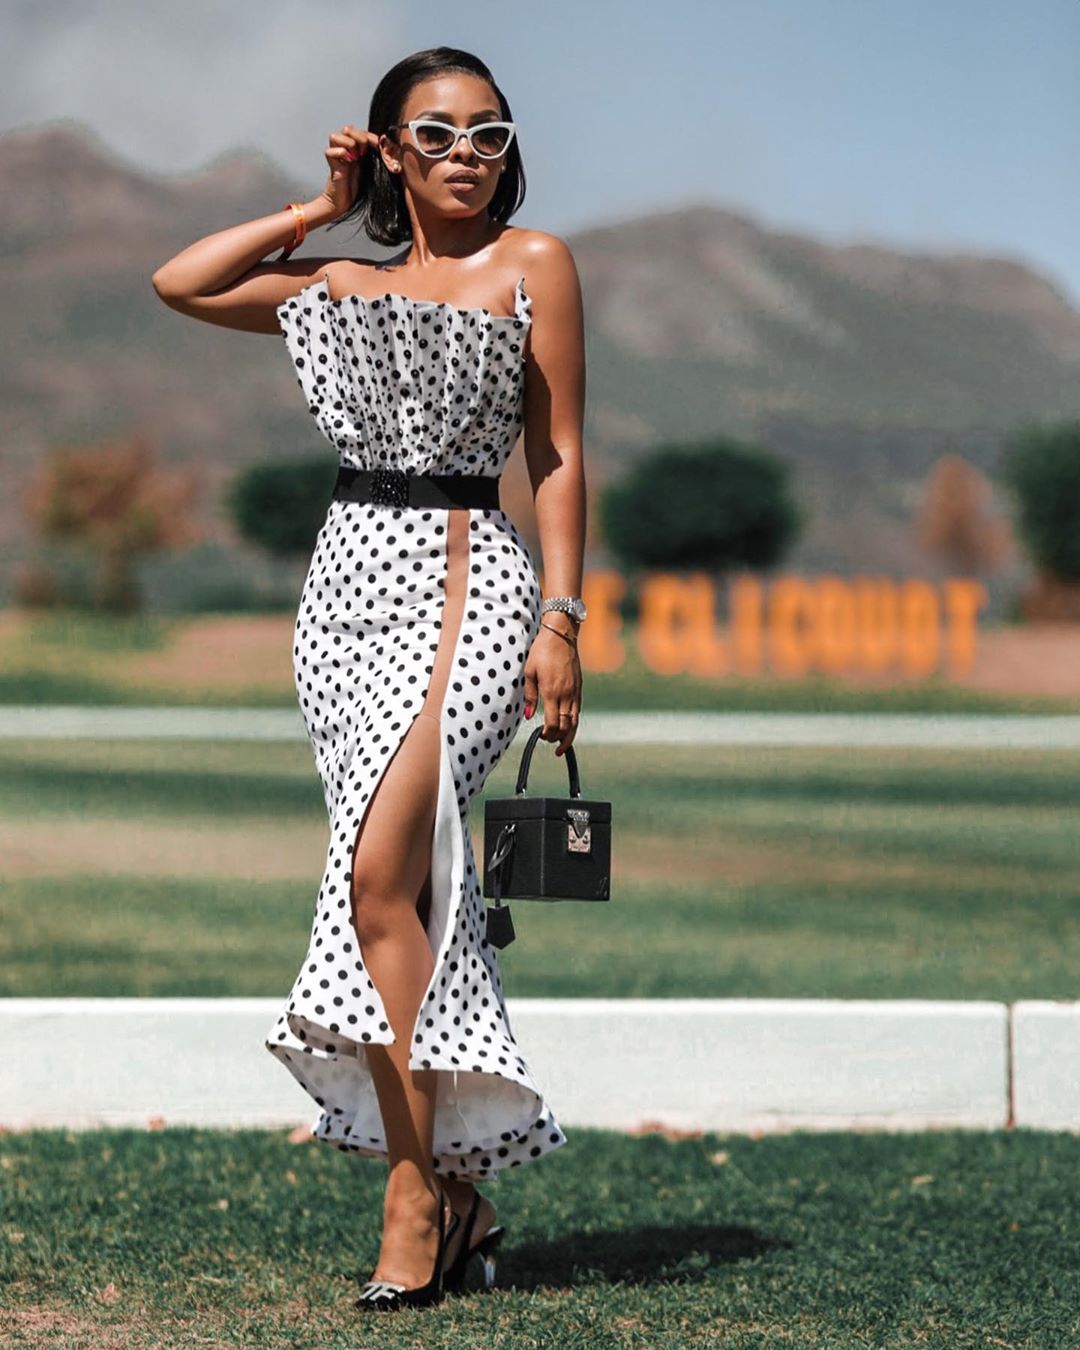 veuve-clicquot-polo-series-vcpoloseries-amvca-nominations-the-most-rave-worthy-looks-on-women-across-africa-march-1st